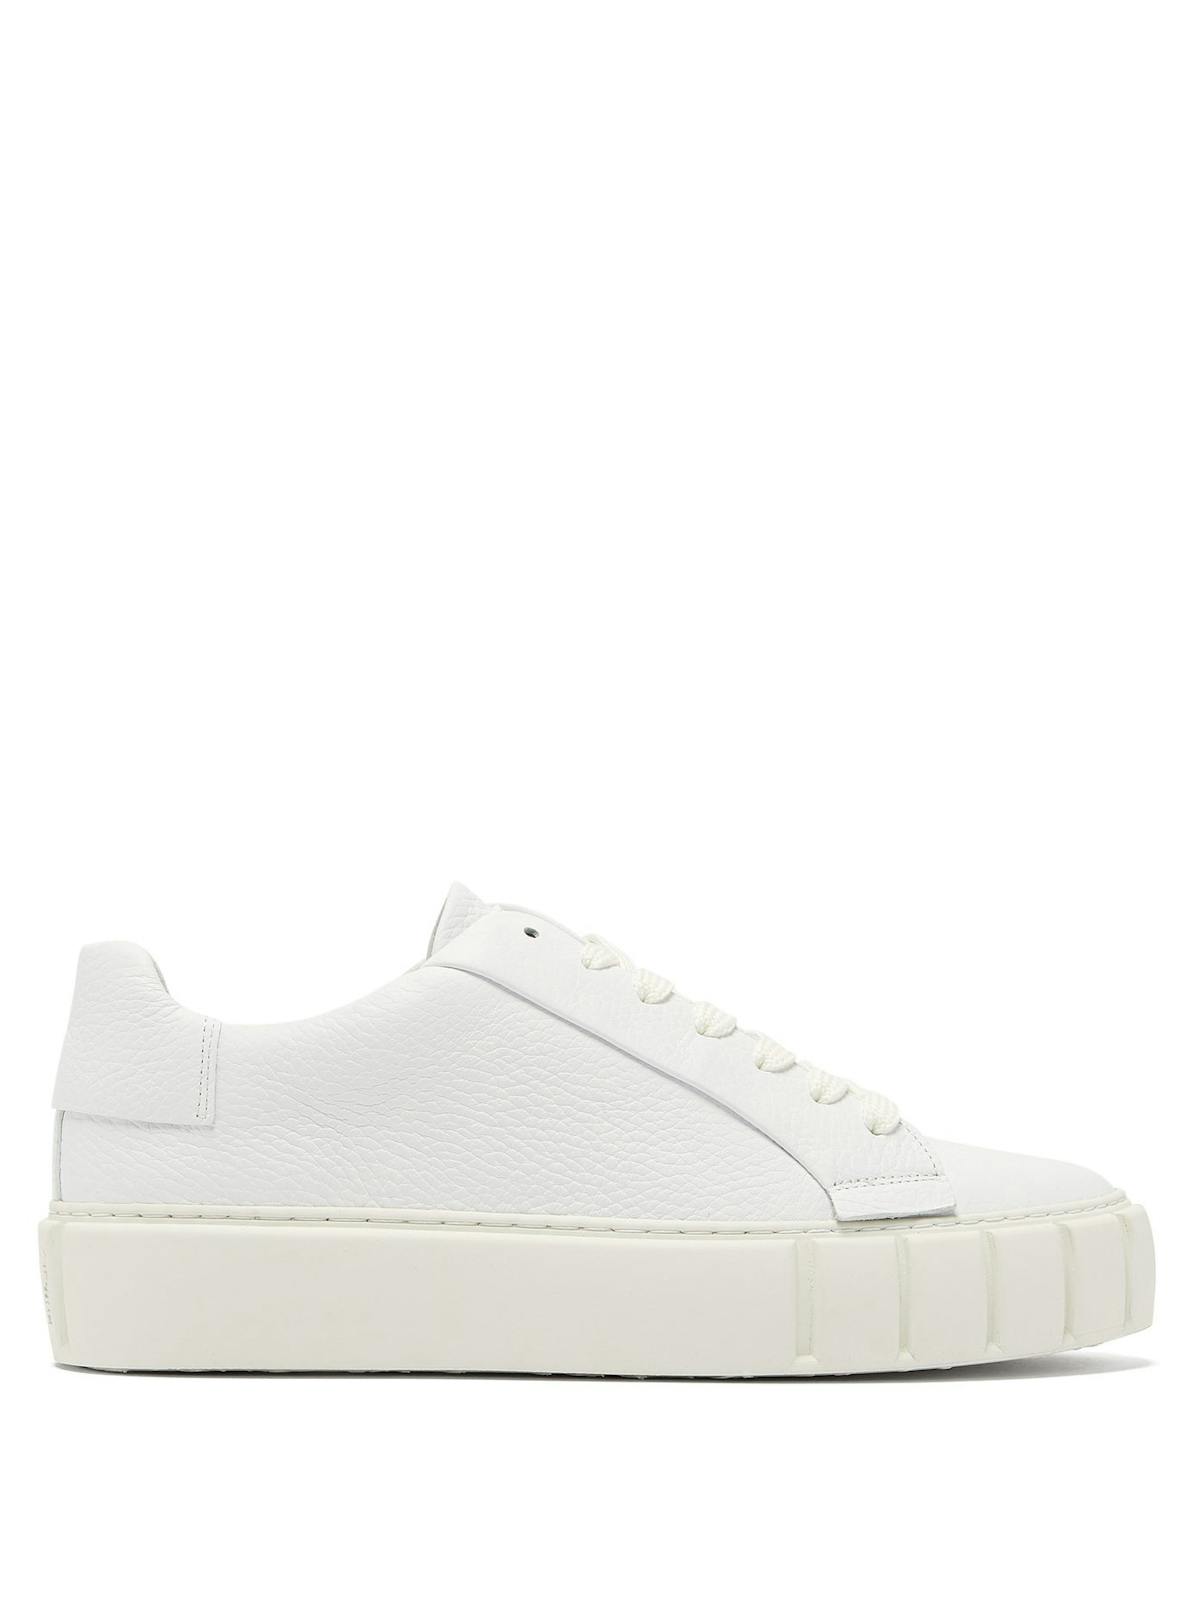 14 best white trainers and sneakers to shop now